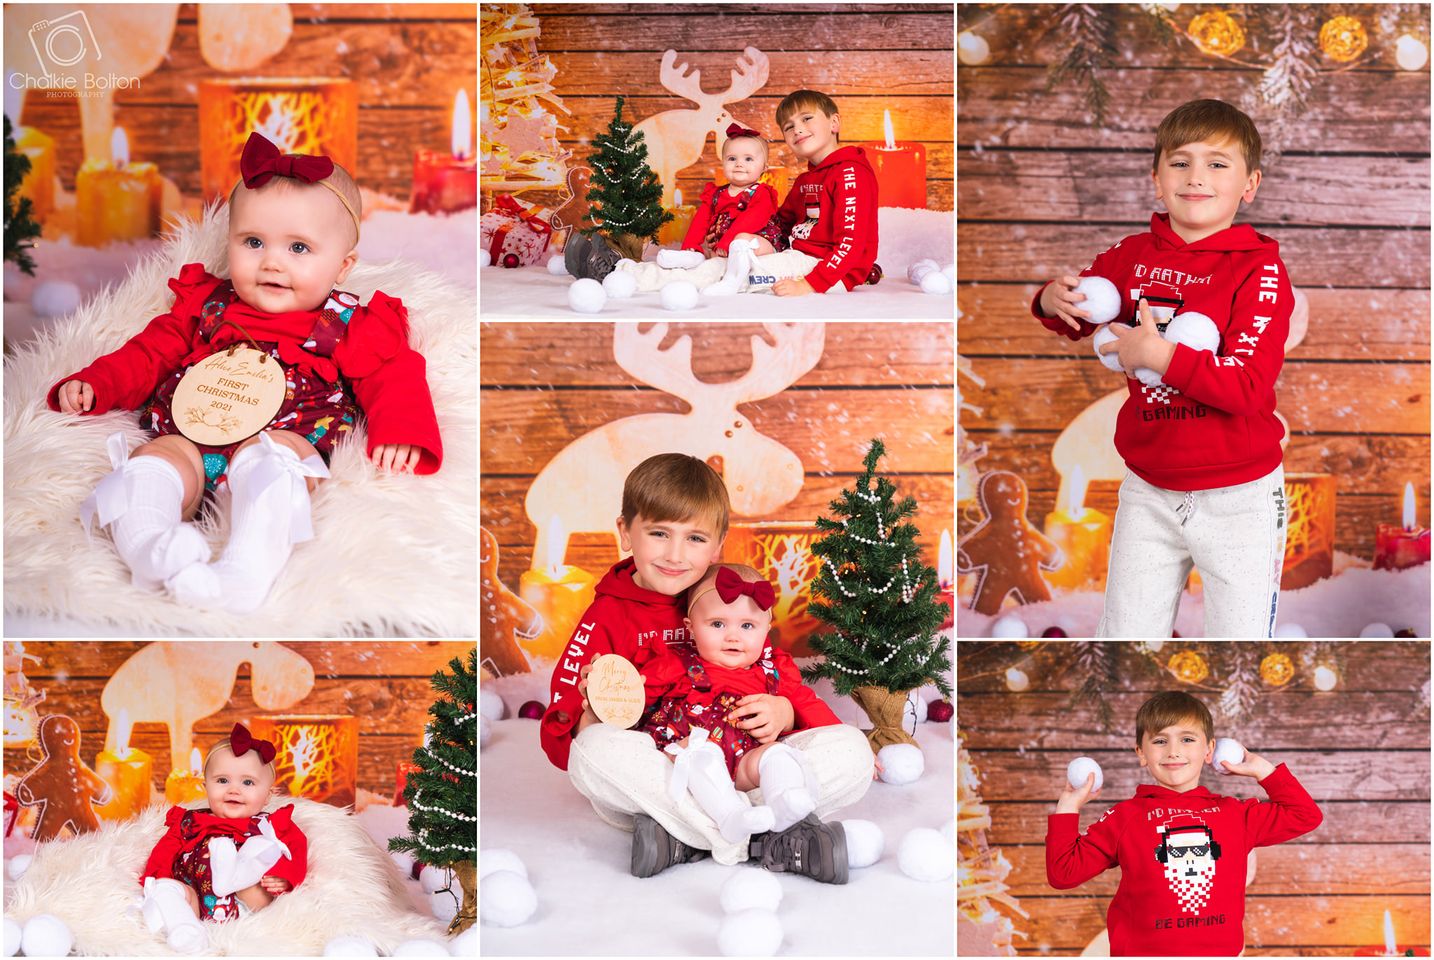 Kate Snow Wooden Wall Backdrop For Christmas Photography